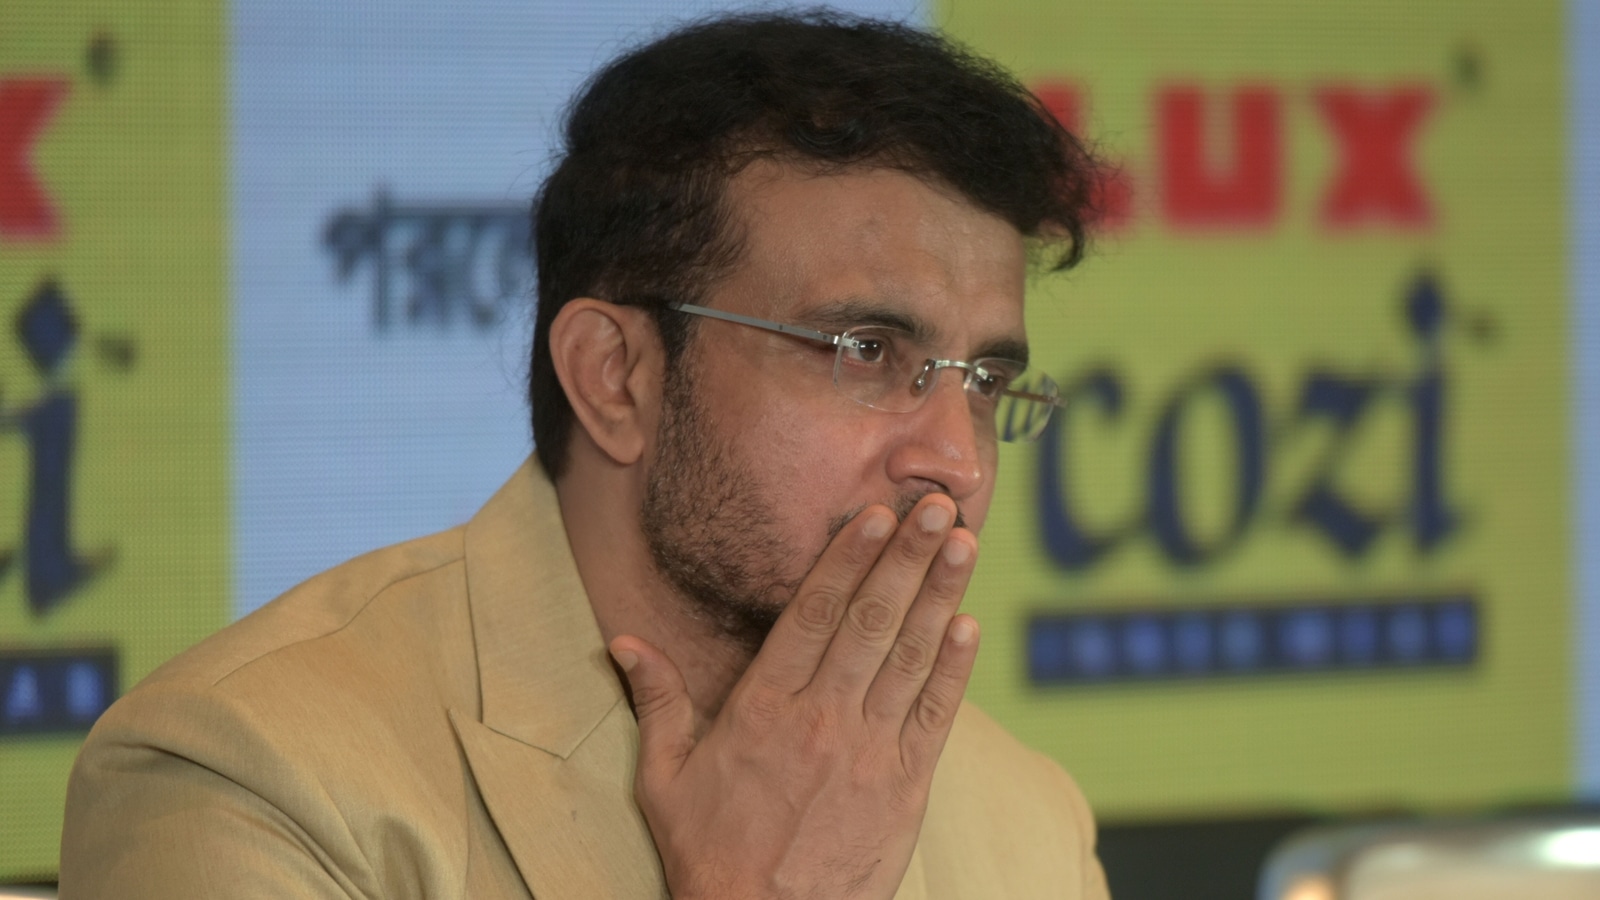 sourav-ganguly-declined-ipl-chairmanship-citing-can-t-become-sub-committee-head-reason-says-bcci-source-report